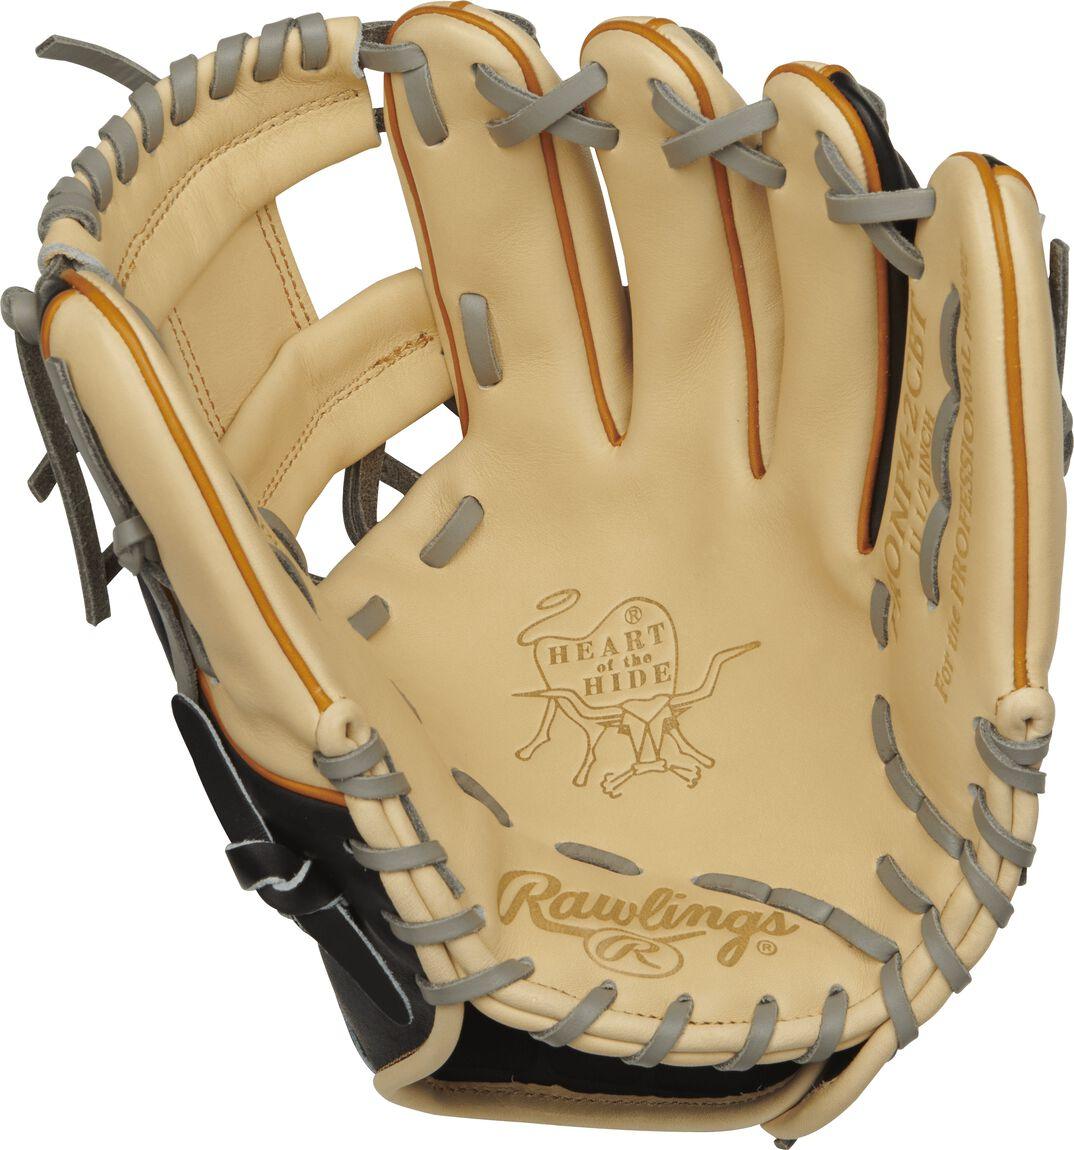 Heart of The Hide 11.5" Infield Baseball Glove - Sports Excellence